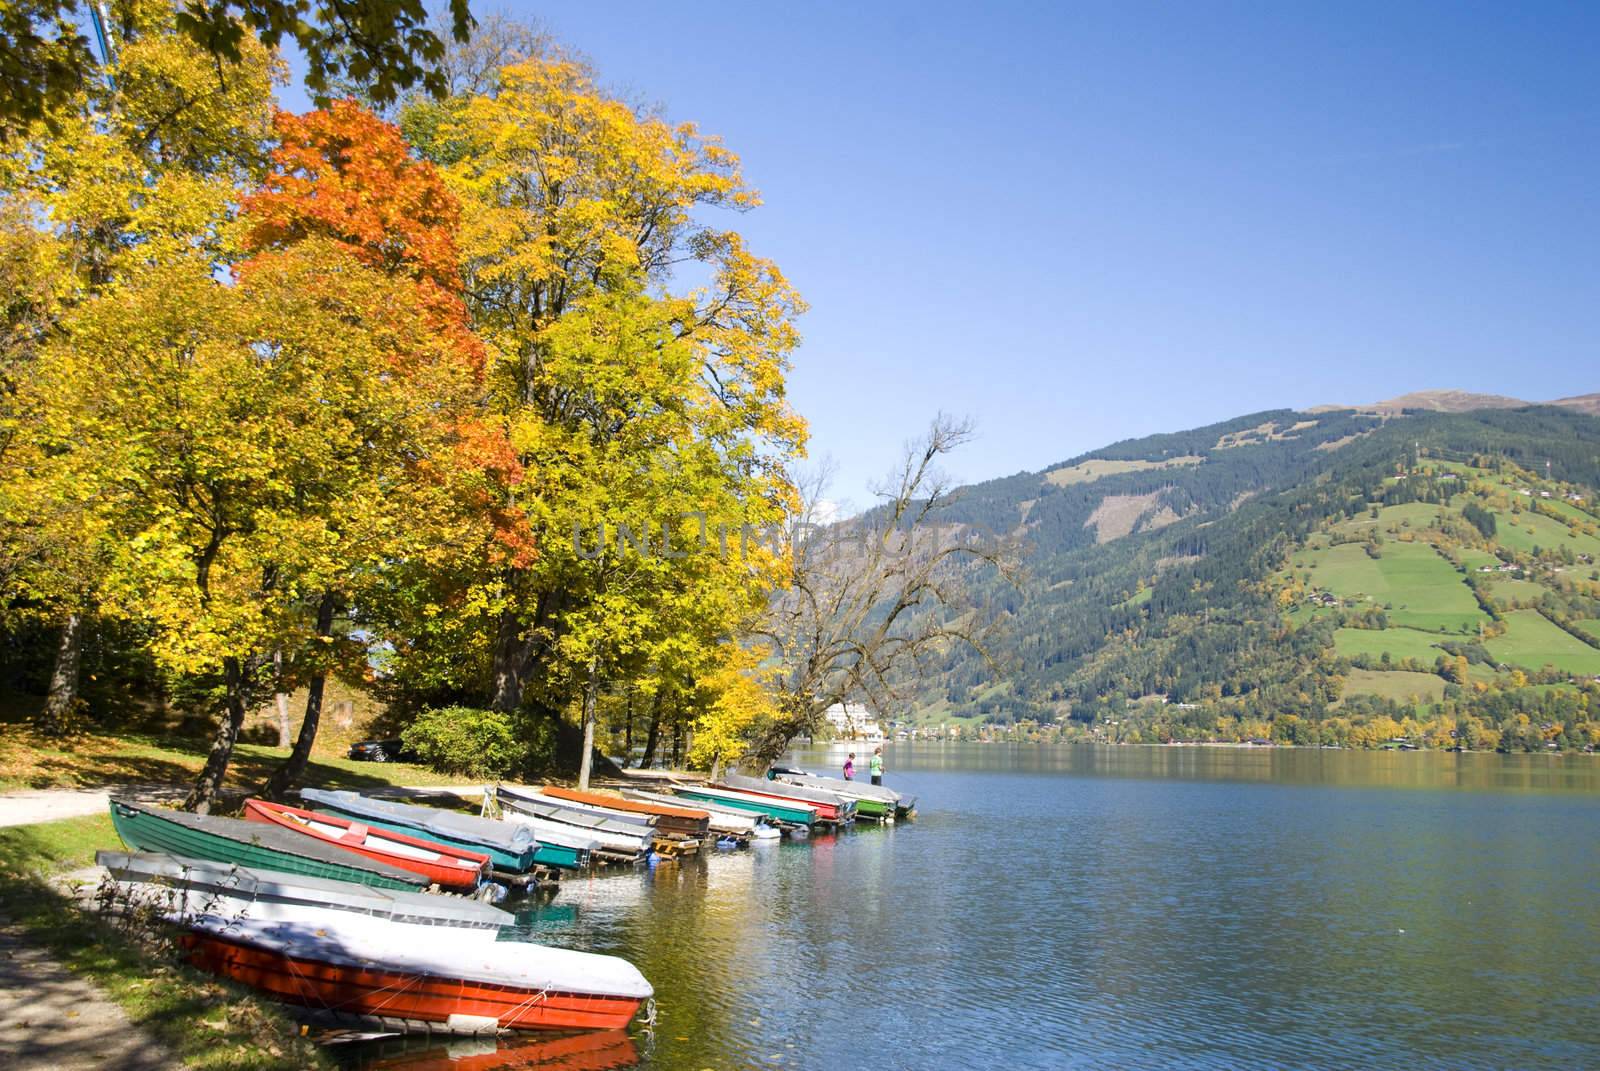 Boats on a beautiful autumn day in "Zell am See", Austria.